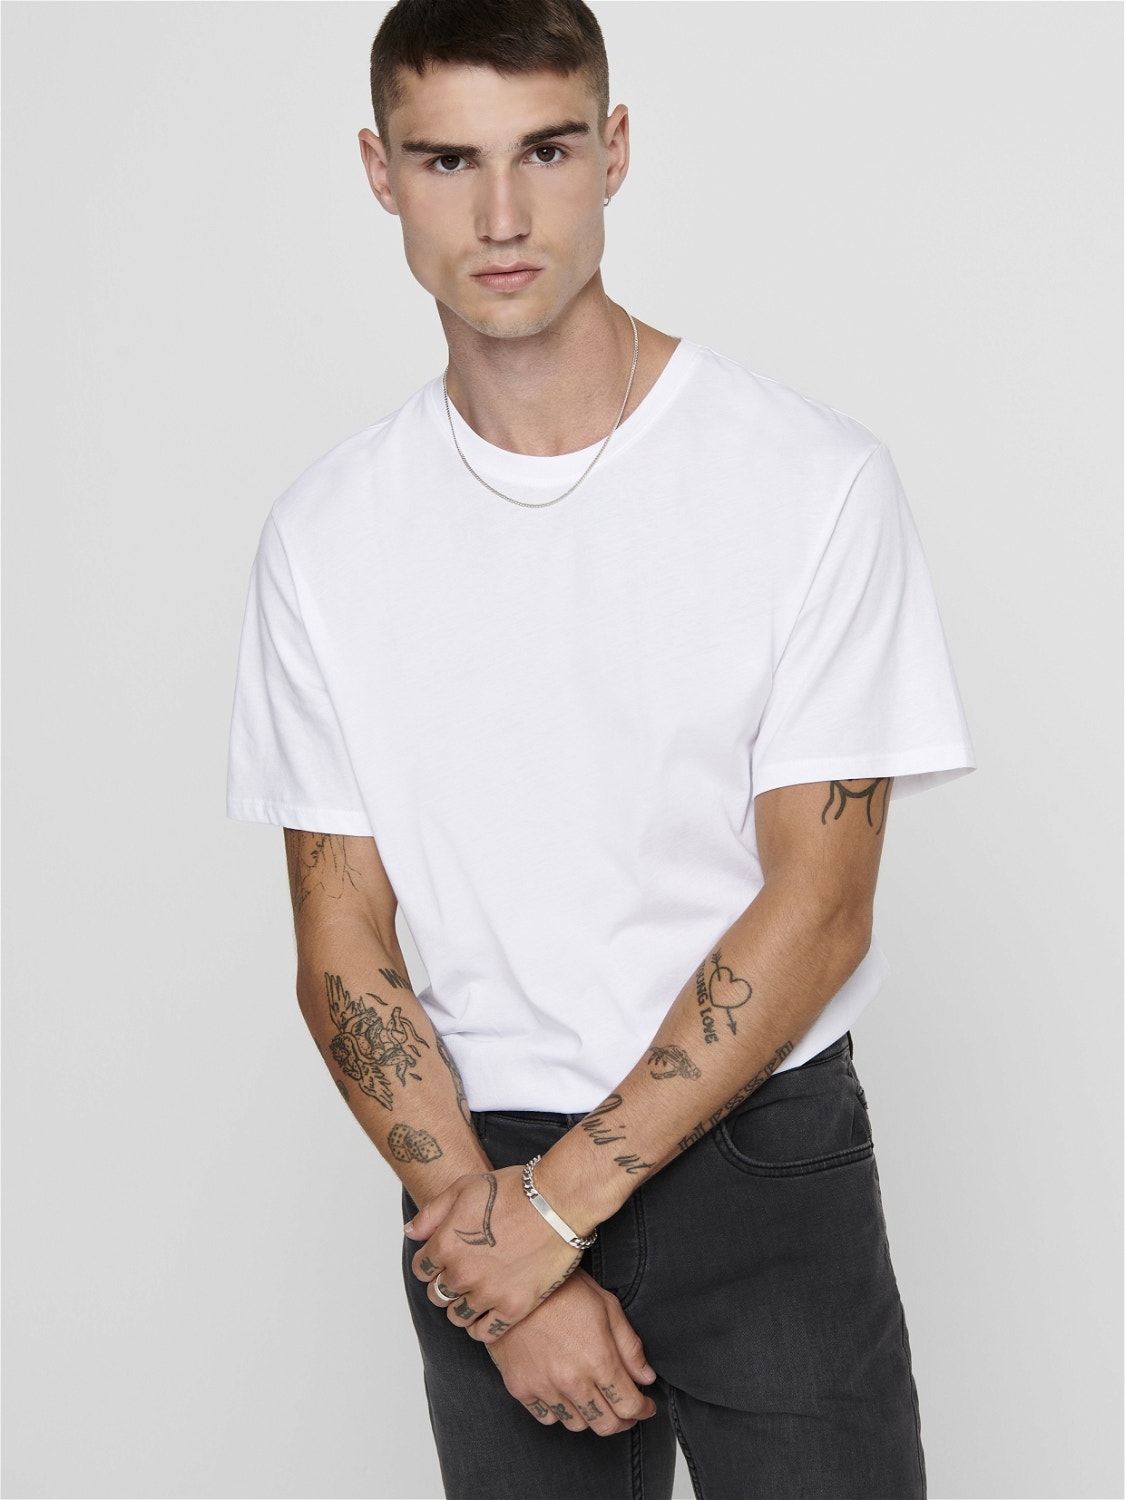 ONLY & SONS Long Line Fit Round Neck T-Shirt -White - 22002973